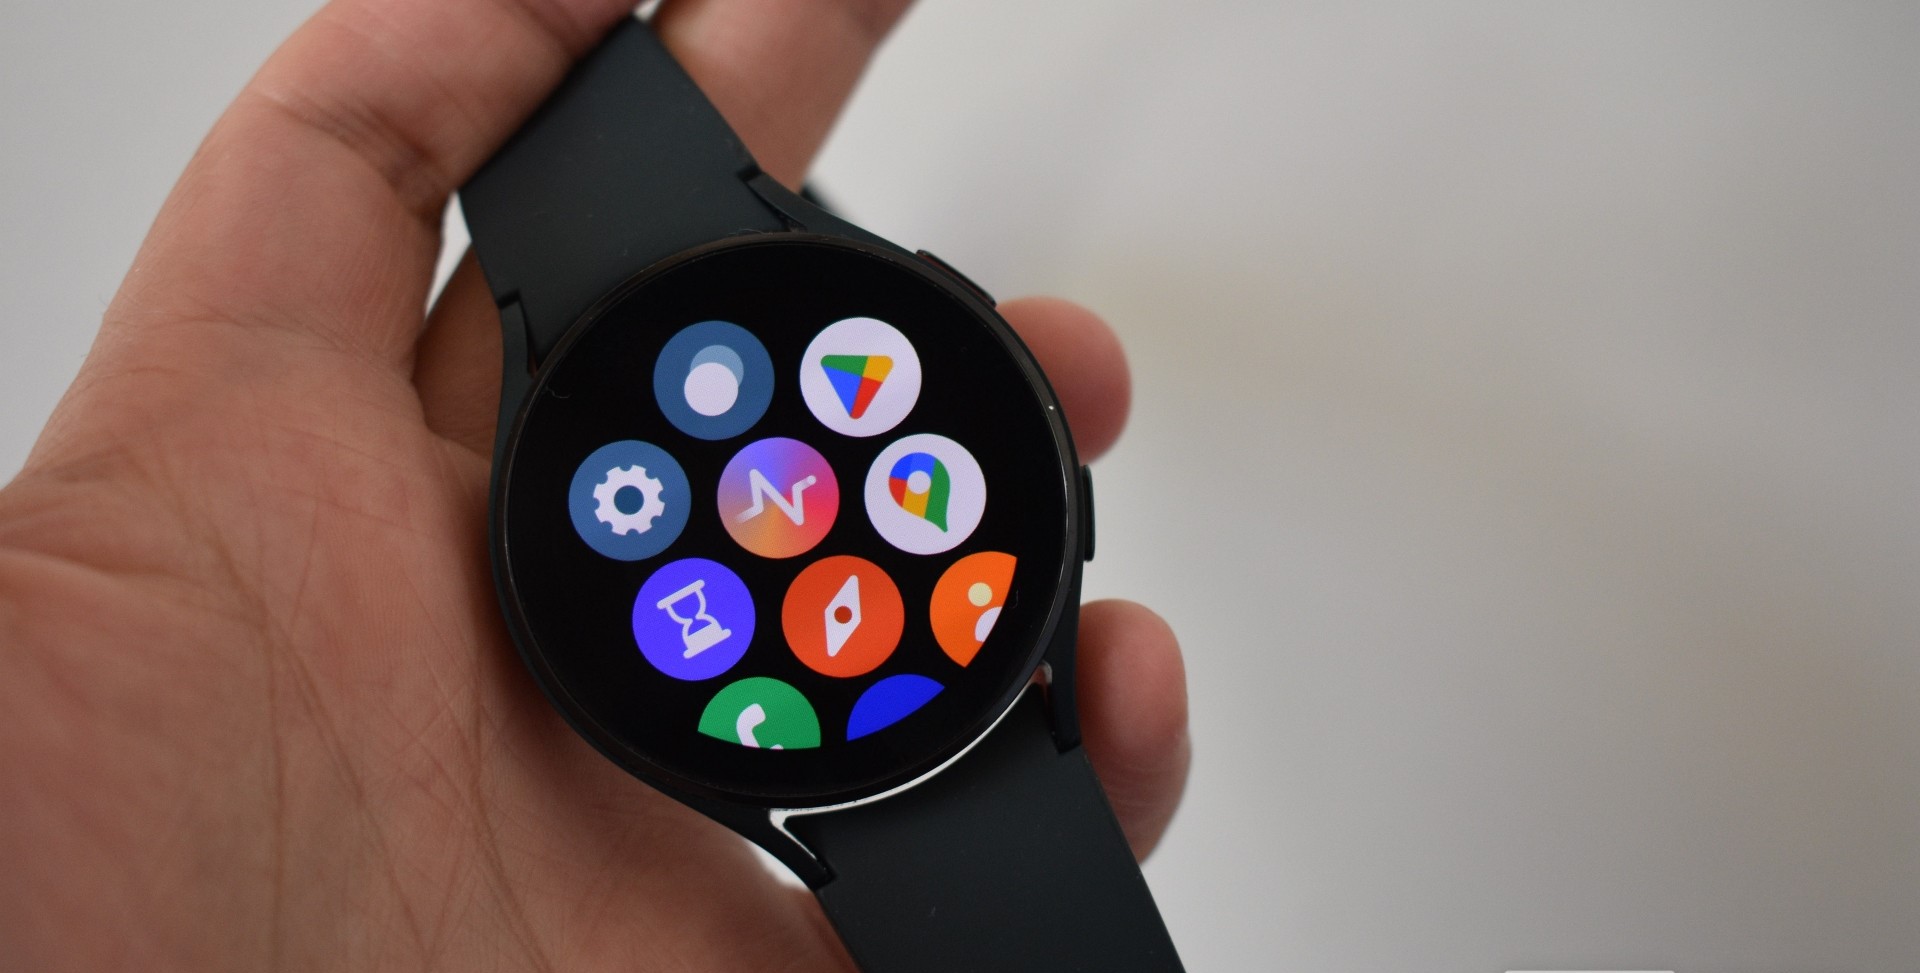 How To Add Apps To A Galaxy Watch